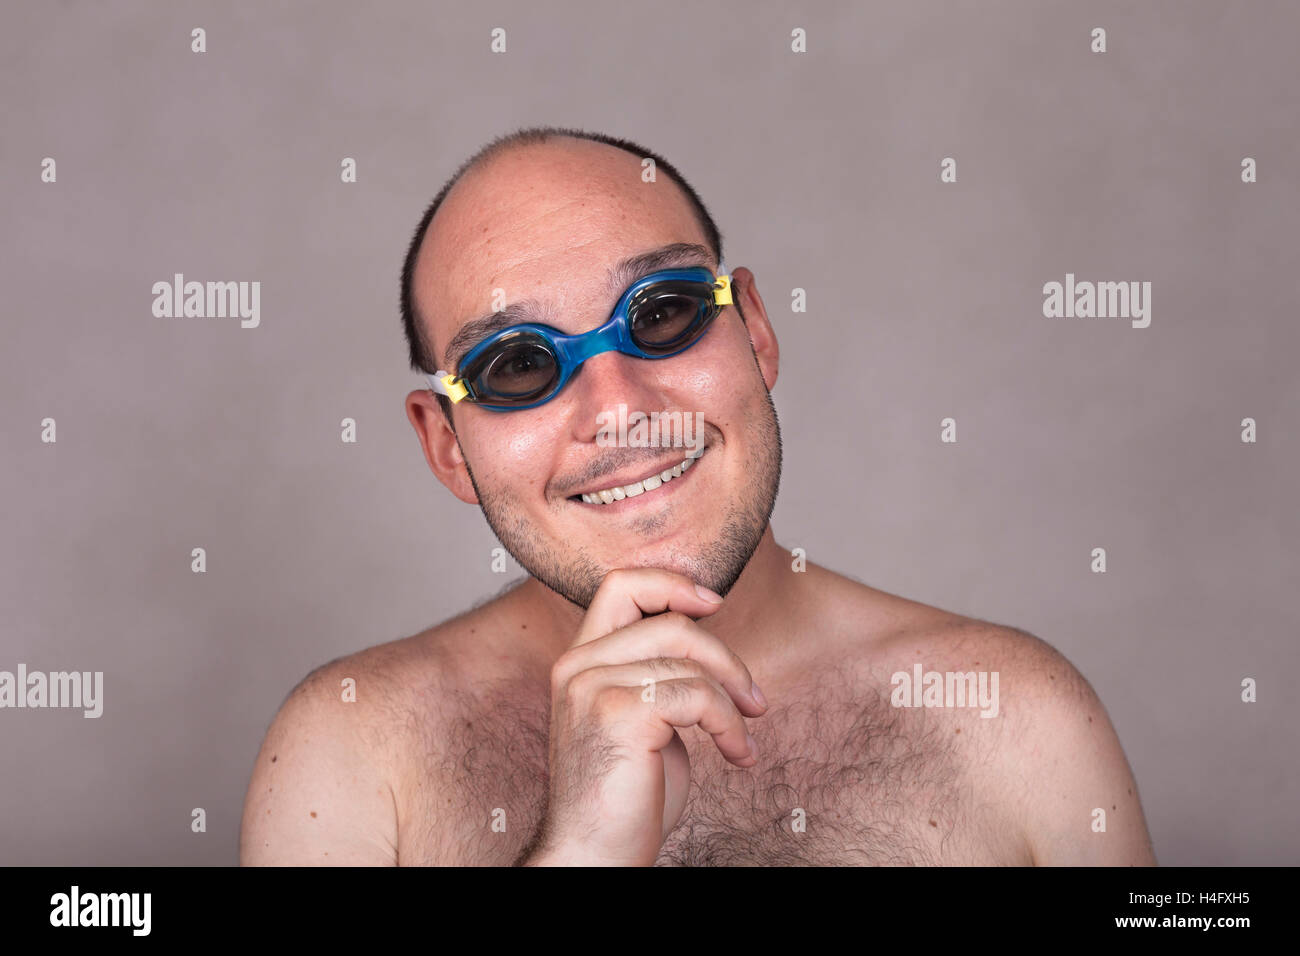 Closeup of funny naked man in swimming goggles daydreaming and looking at you. Stock Photo